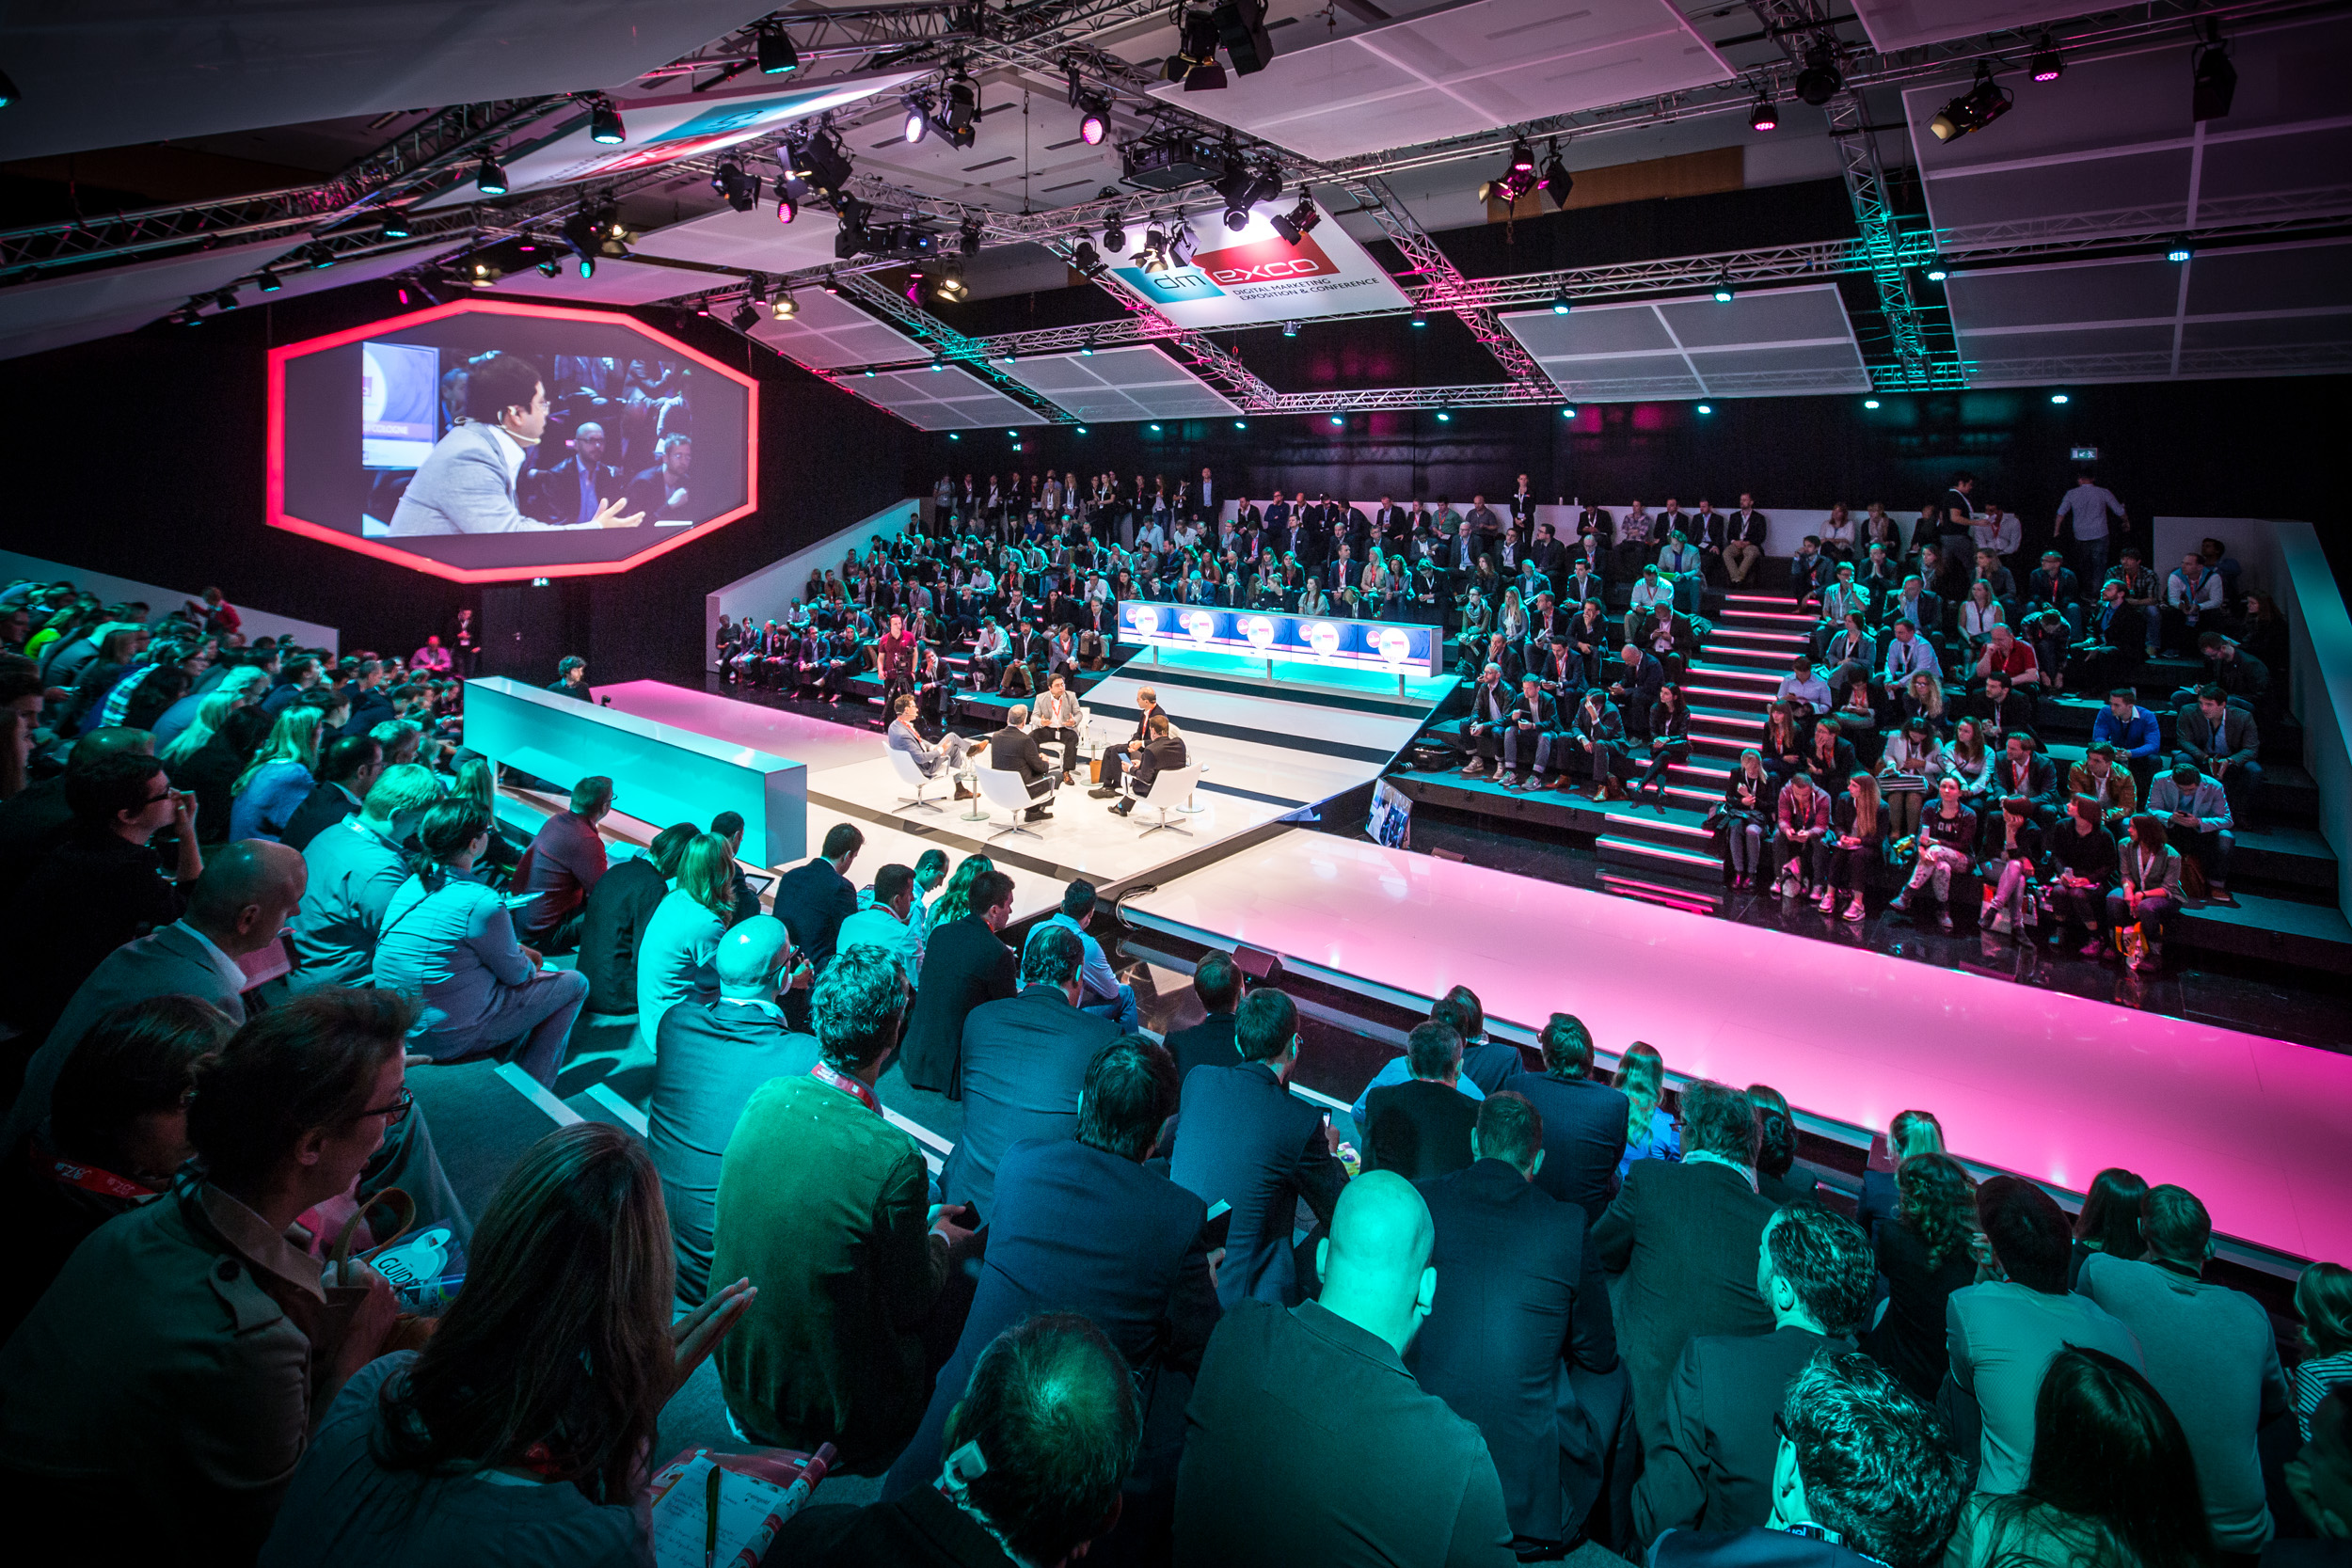 With a new exhibitor record of 881 companies from all over the world, a record amount of floor space measuring 75,000 square meters, the occupancy of four halls for the first time, and more than 500 top international speakers, dmexco is connecting all of the worlds of the digiconomy under this year's slogan of "Bridging Worlds." (image credit: dmexco) 